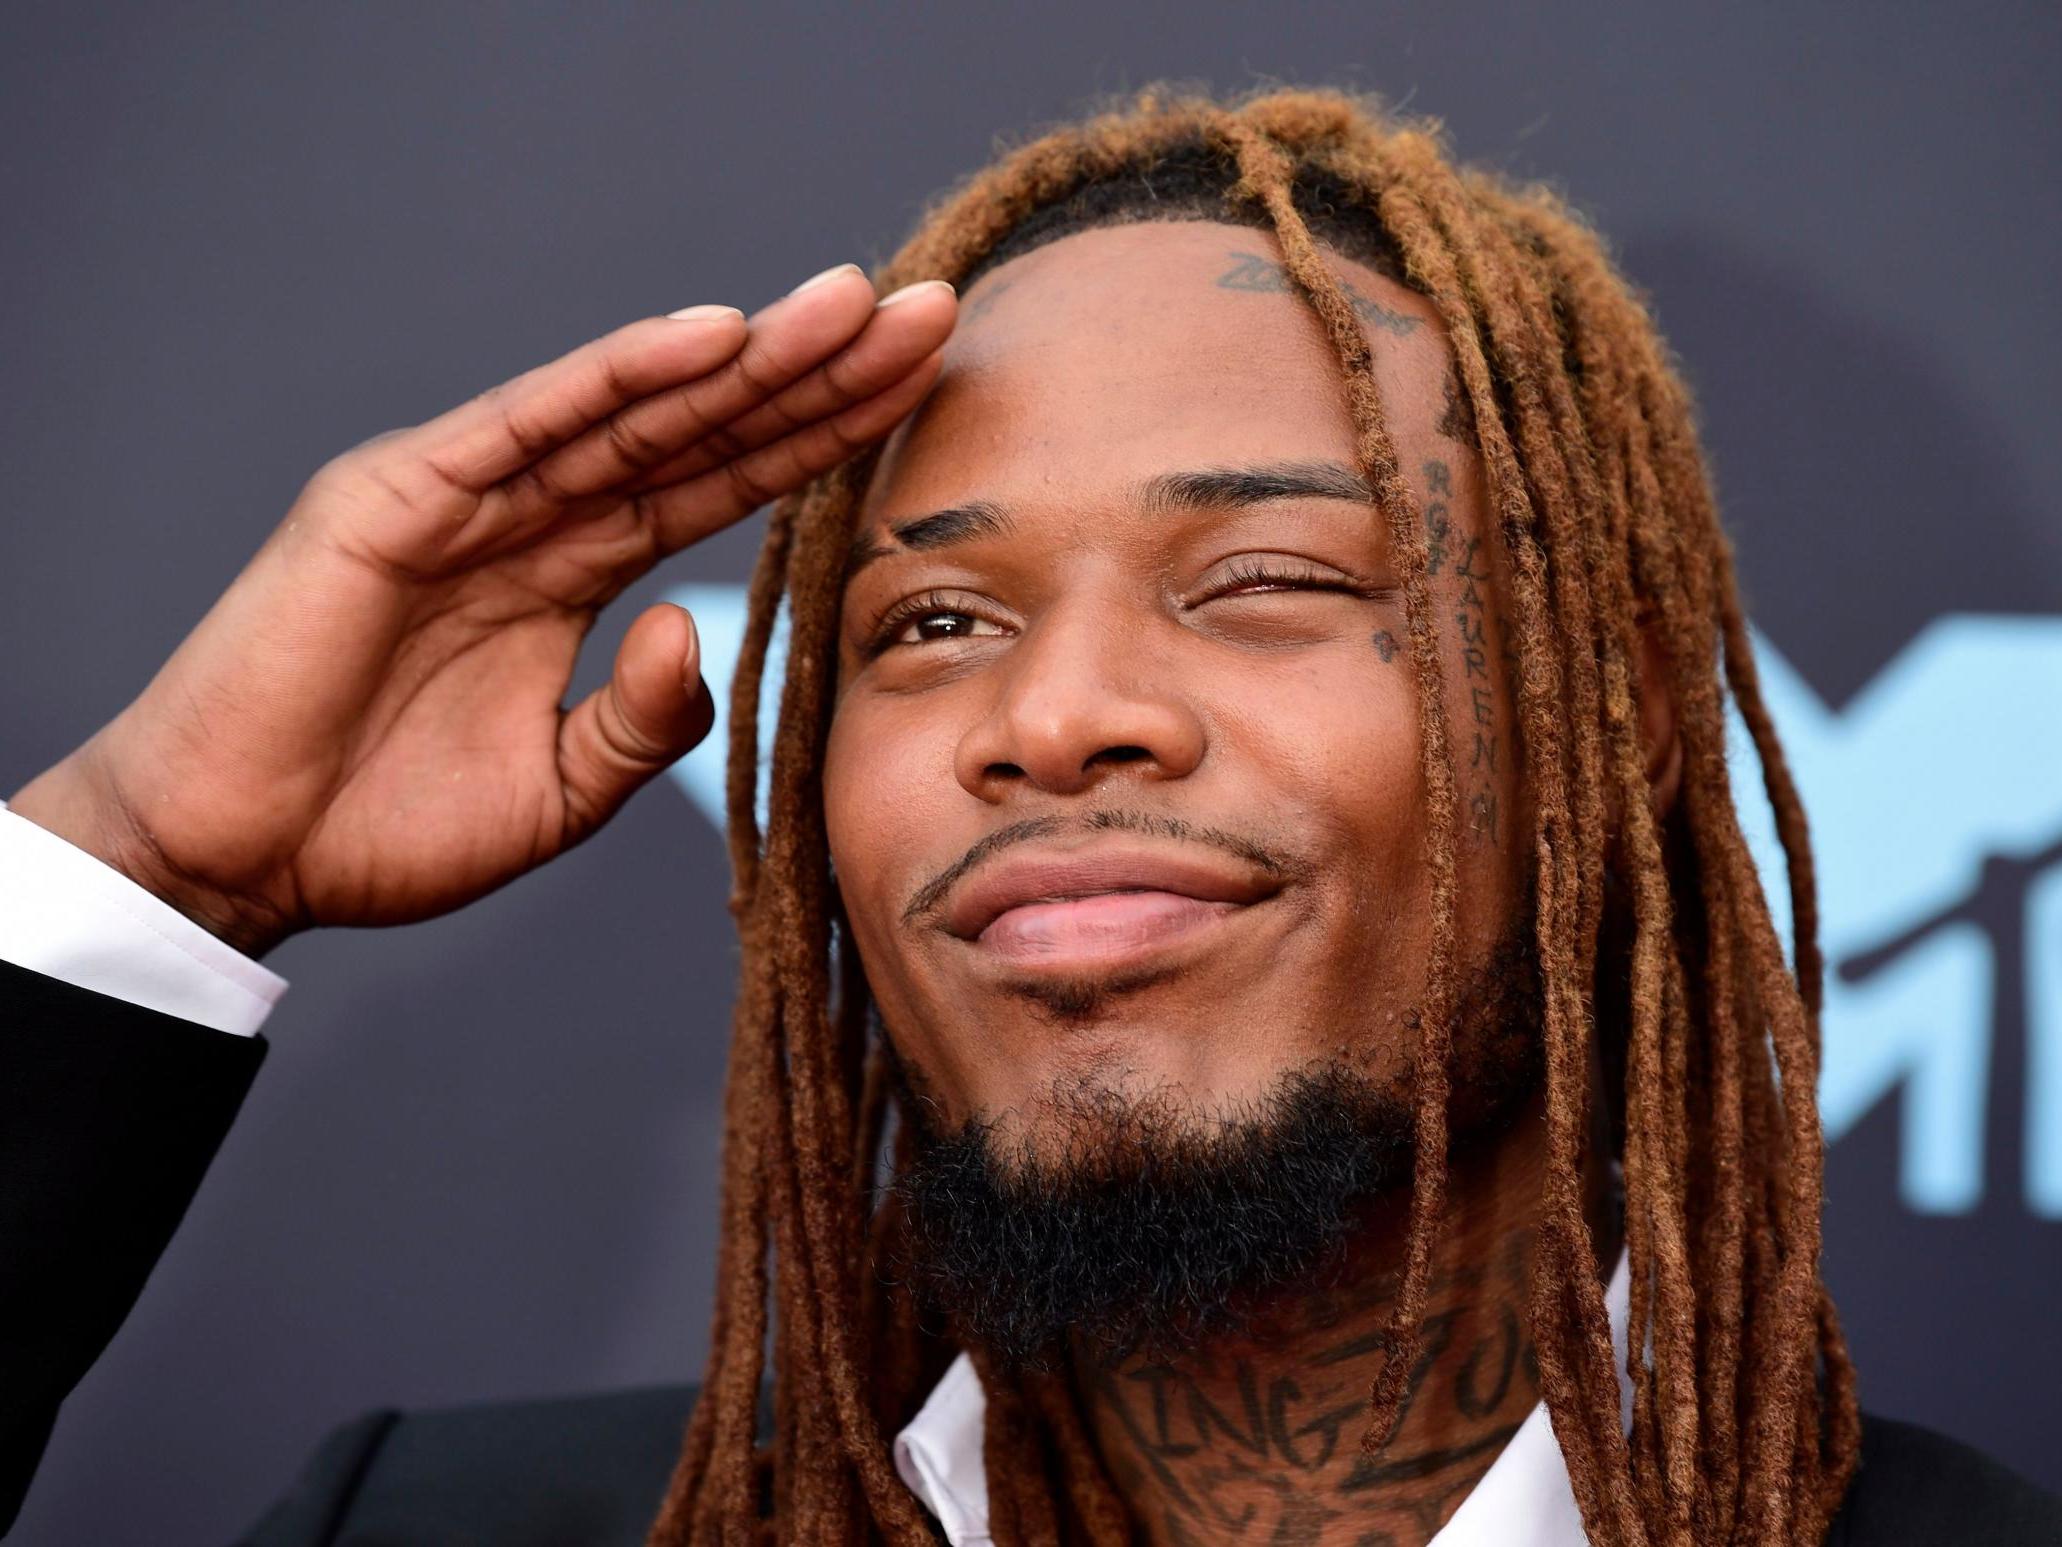 Fetty Wap has been arrested after allegedly assaulting three hotel employees